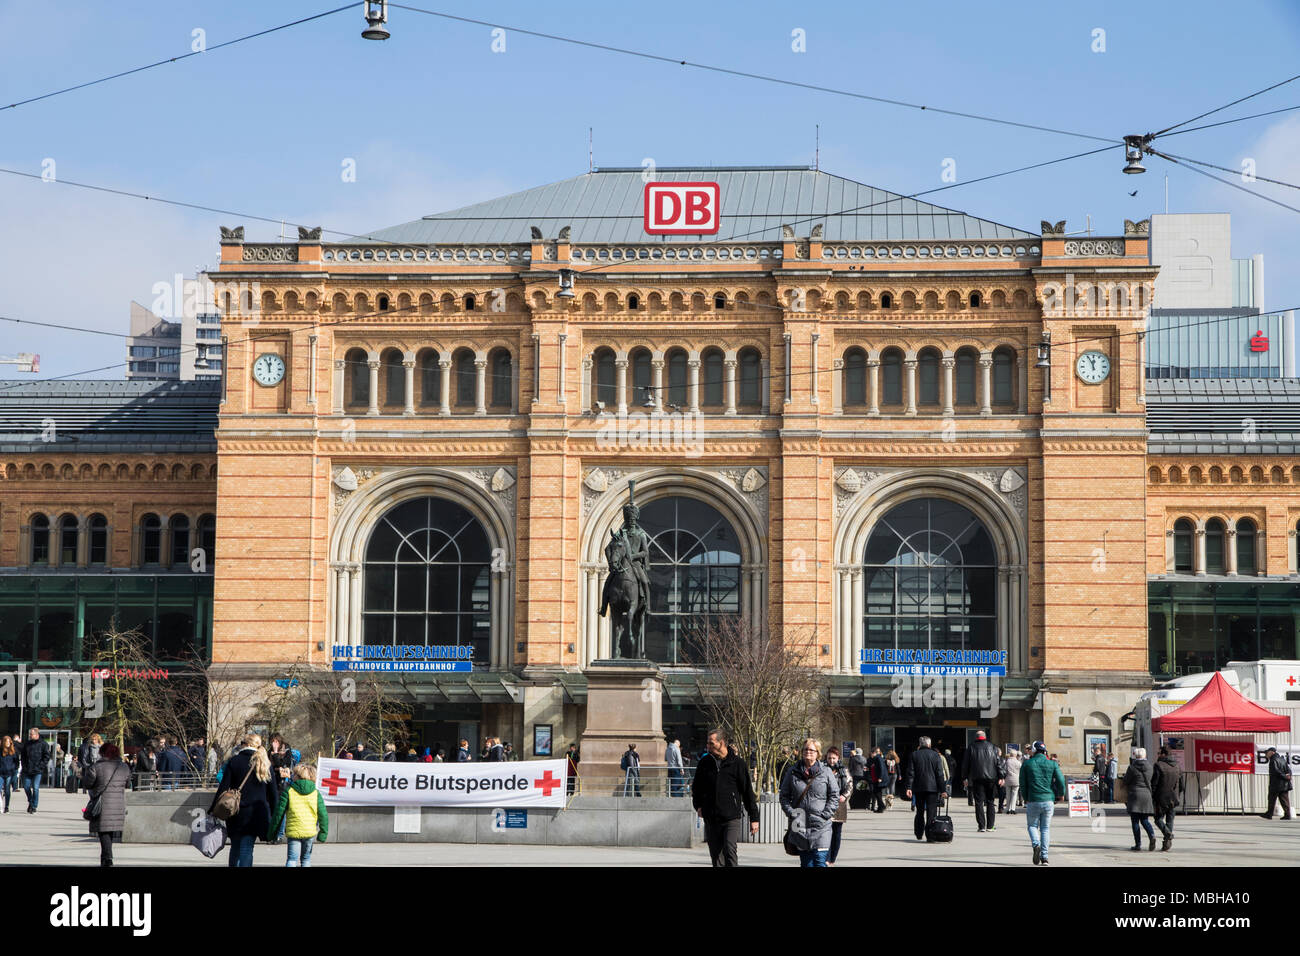 Hannover, Germany. Views of Ernst-August-Platz square and Hannover Hauptbanhof, the main rail station of the city, with the equestrian statue Stock Photo